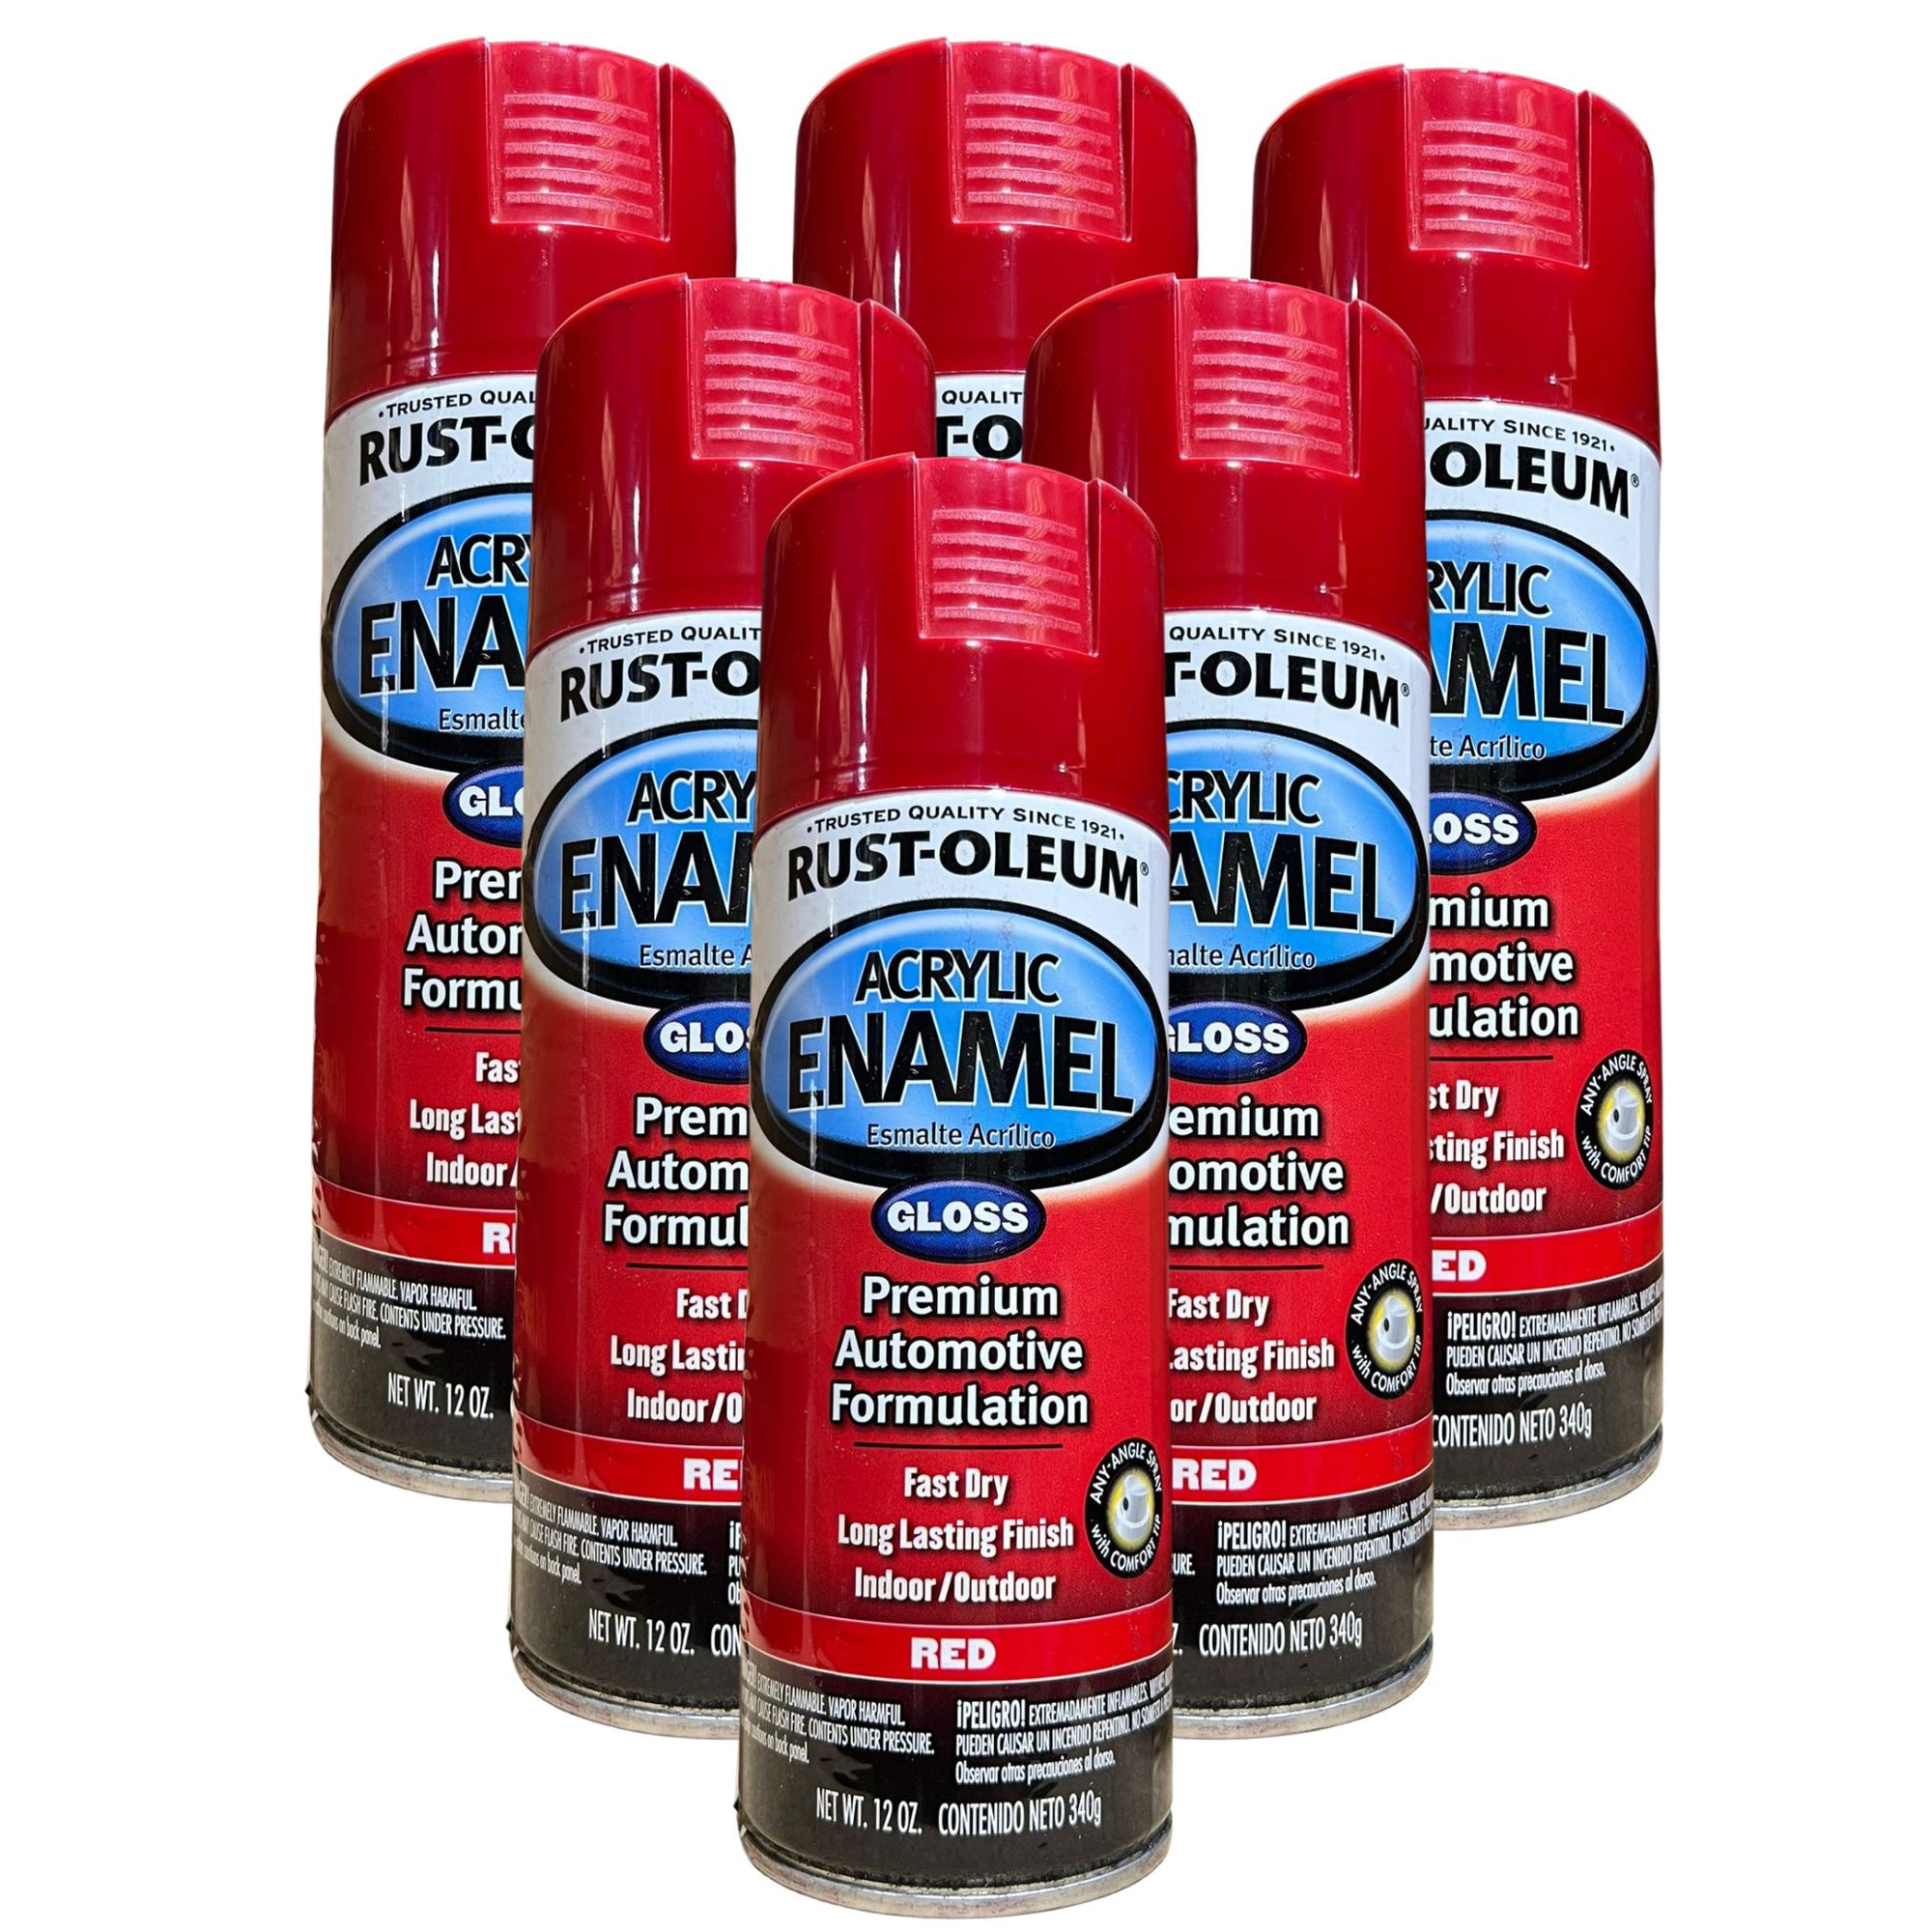 Rust-oleum Acrylic Enamel - Gloss Red 6 Cans - South East Clearance Centre